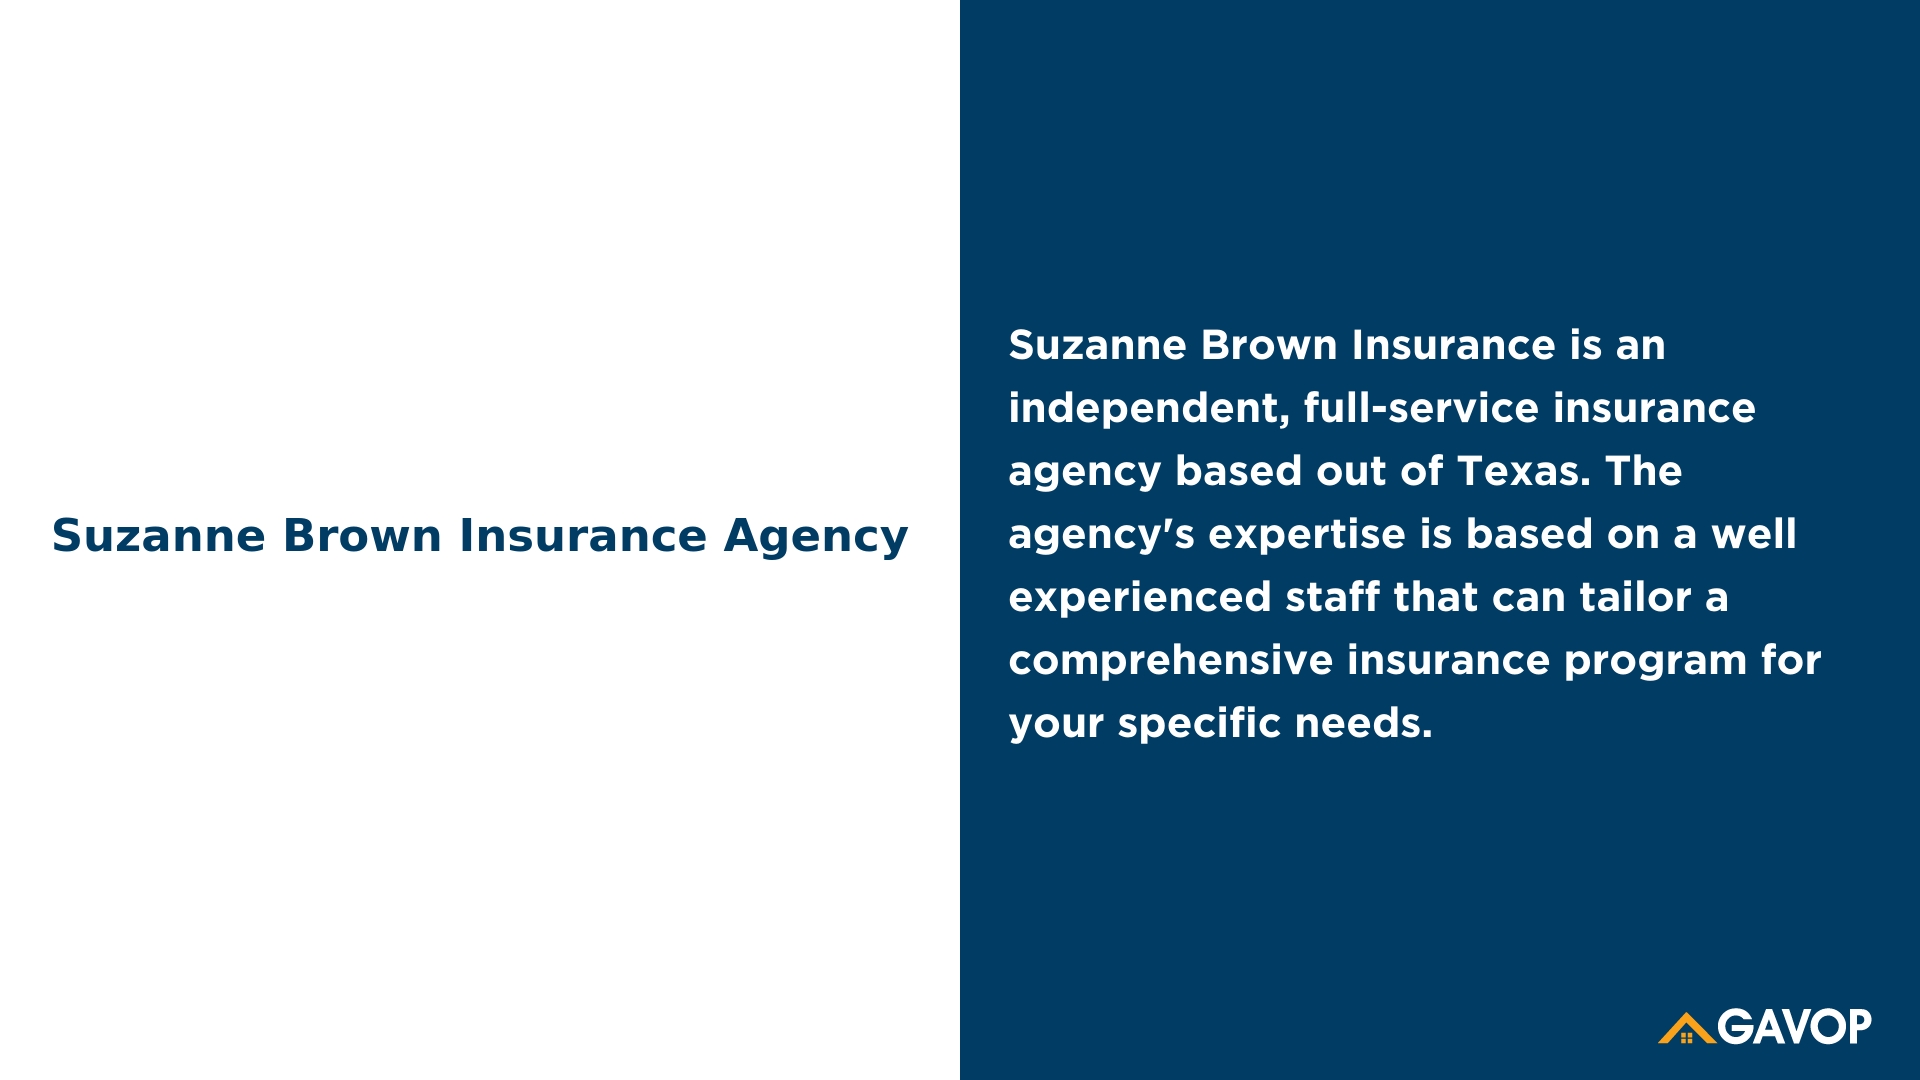 Suzanne Brown Insurance Agency